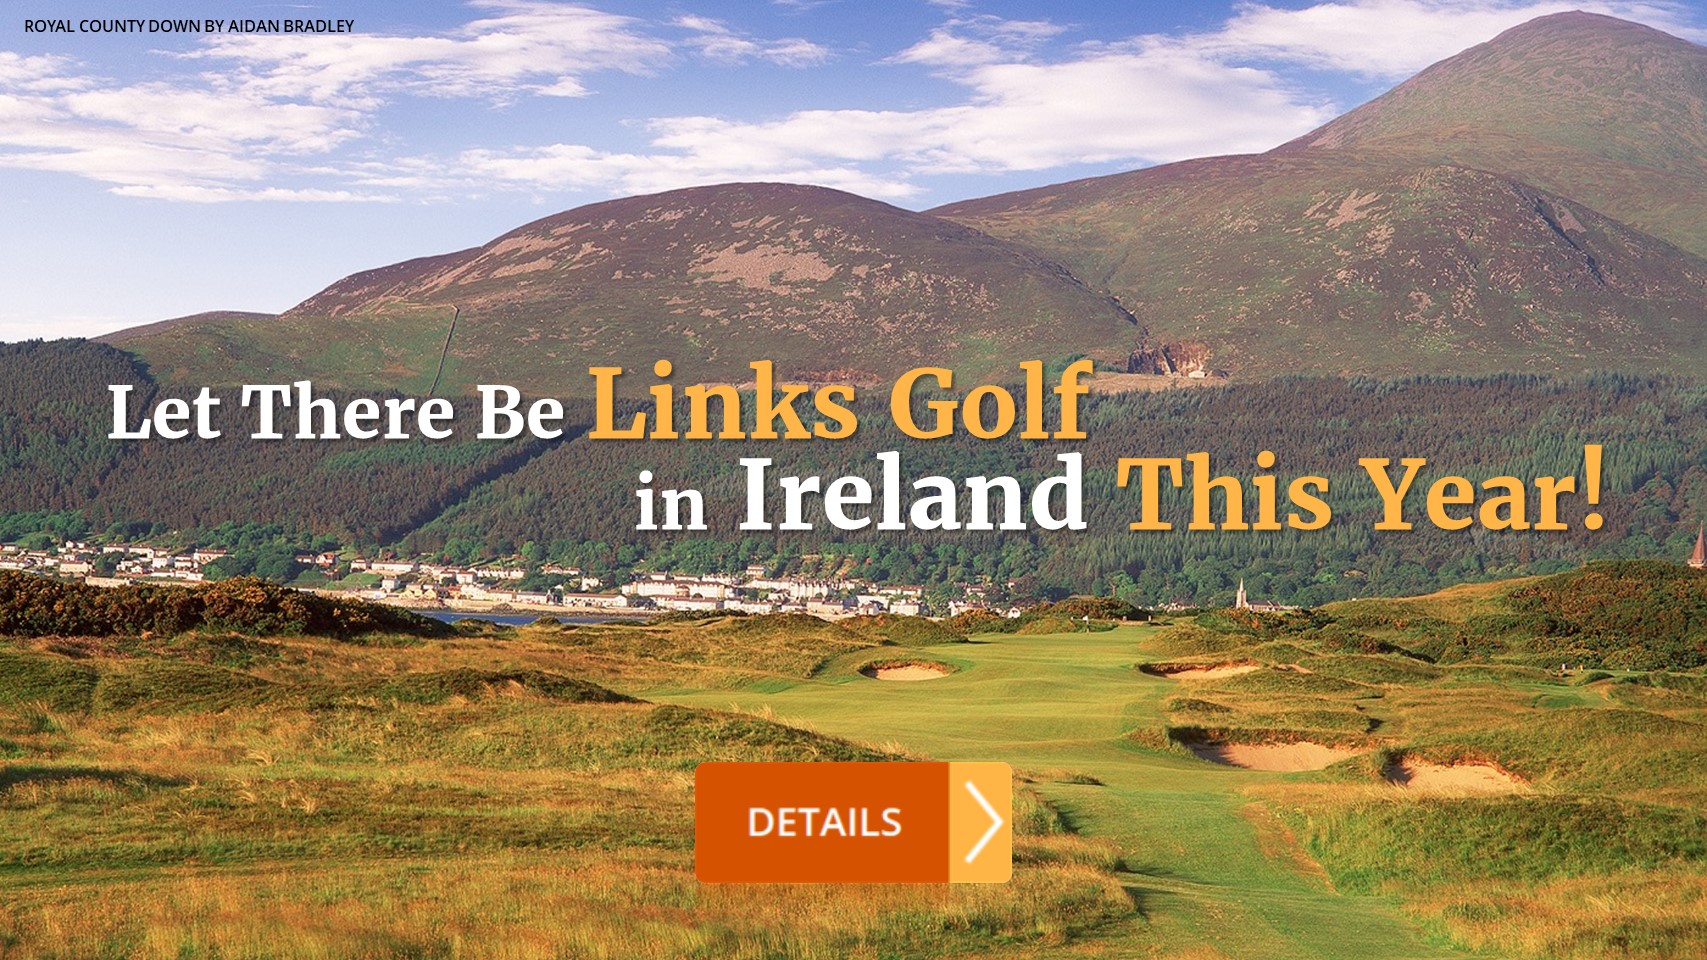 YES! Let There Be Links Golf in Ireland This Year! - PerryGolf.com